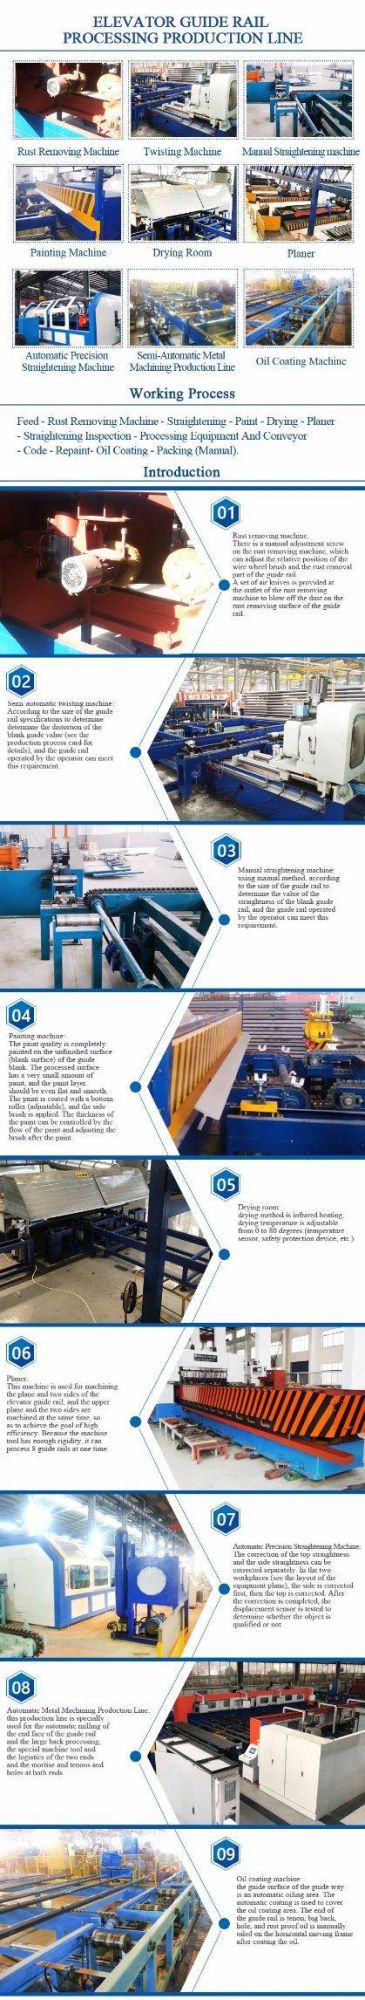 Manufacturer Making in China Bracket Hollow Lift Elevator Guide Rail Roll Forming Machine